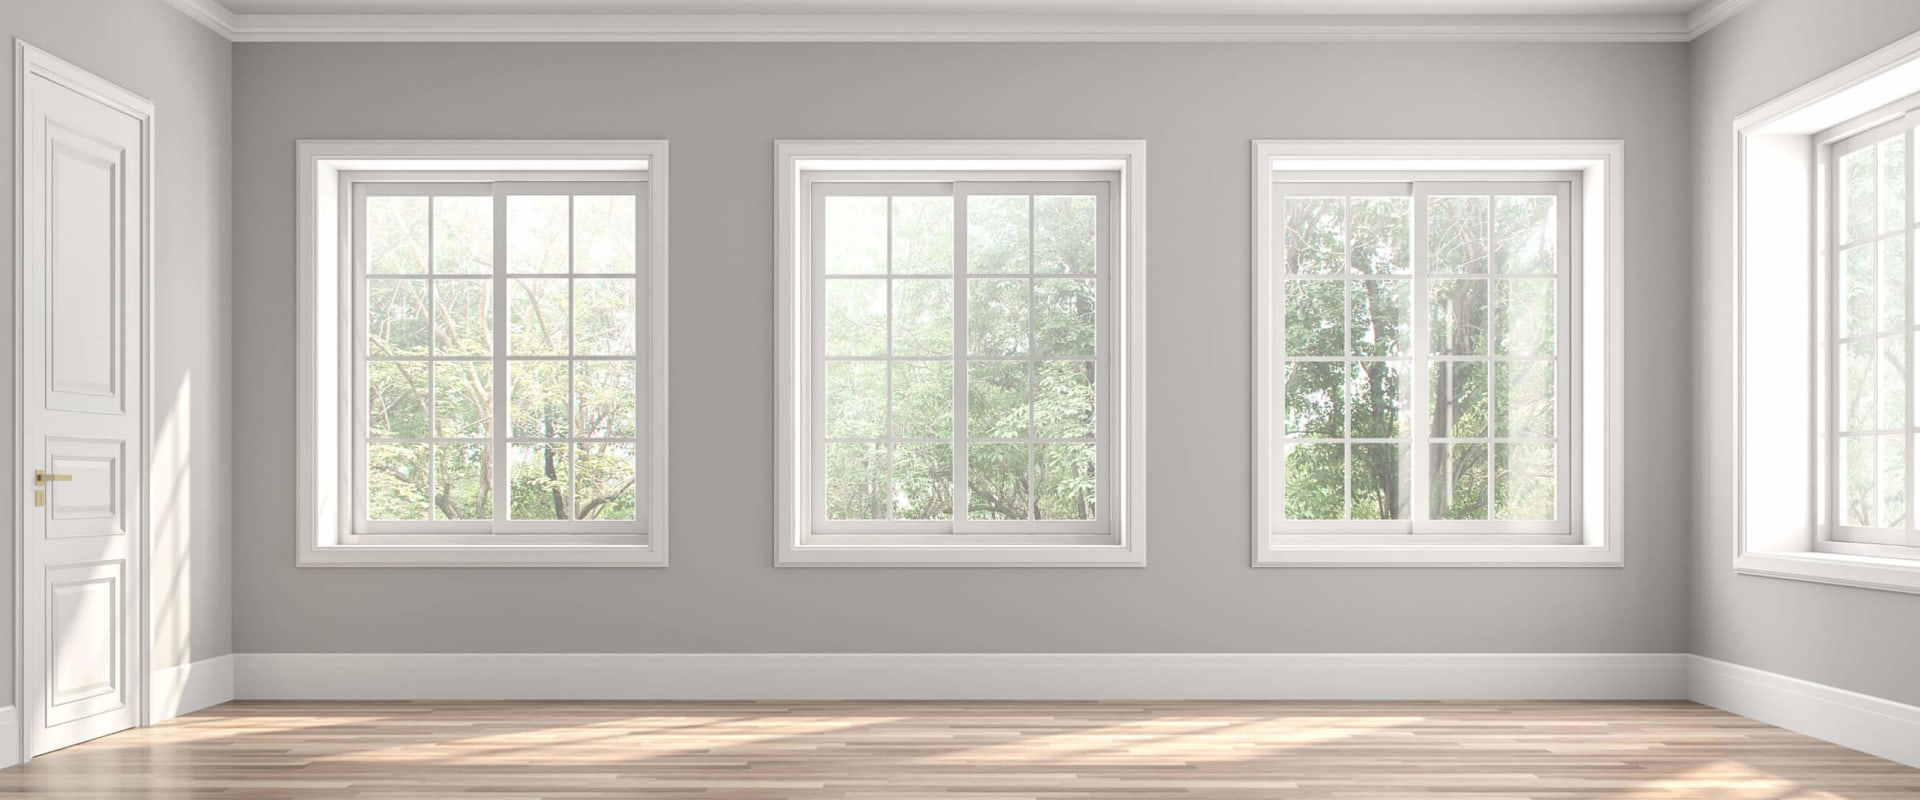 Replacing Mobile Home Windows: Who Does It and How